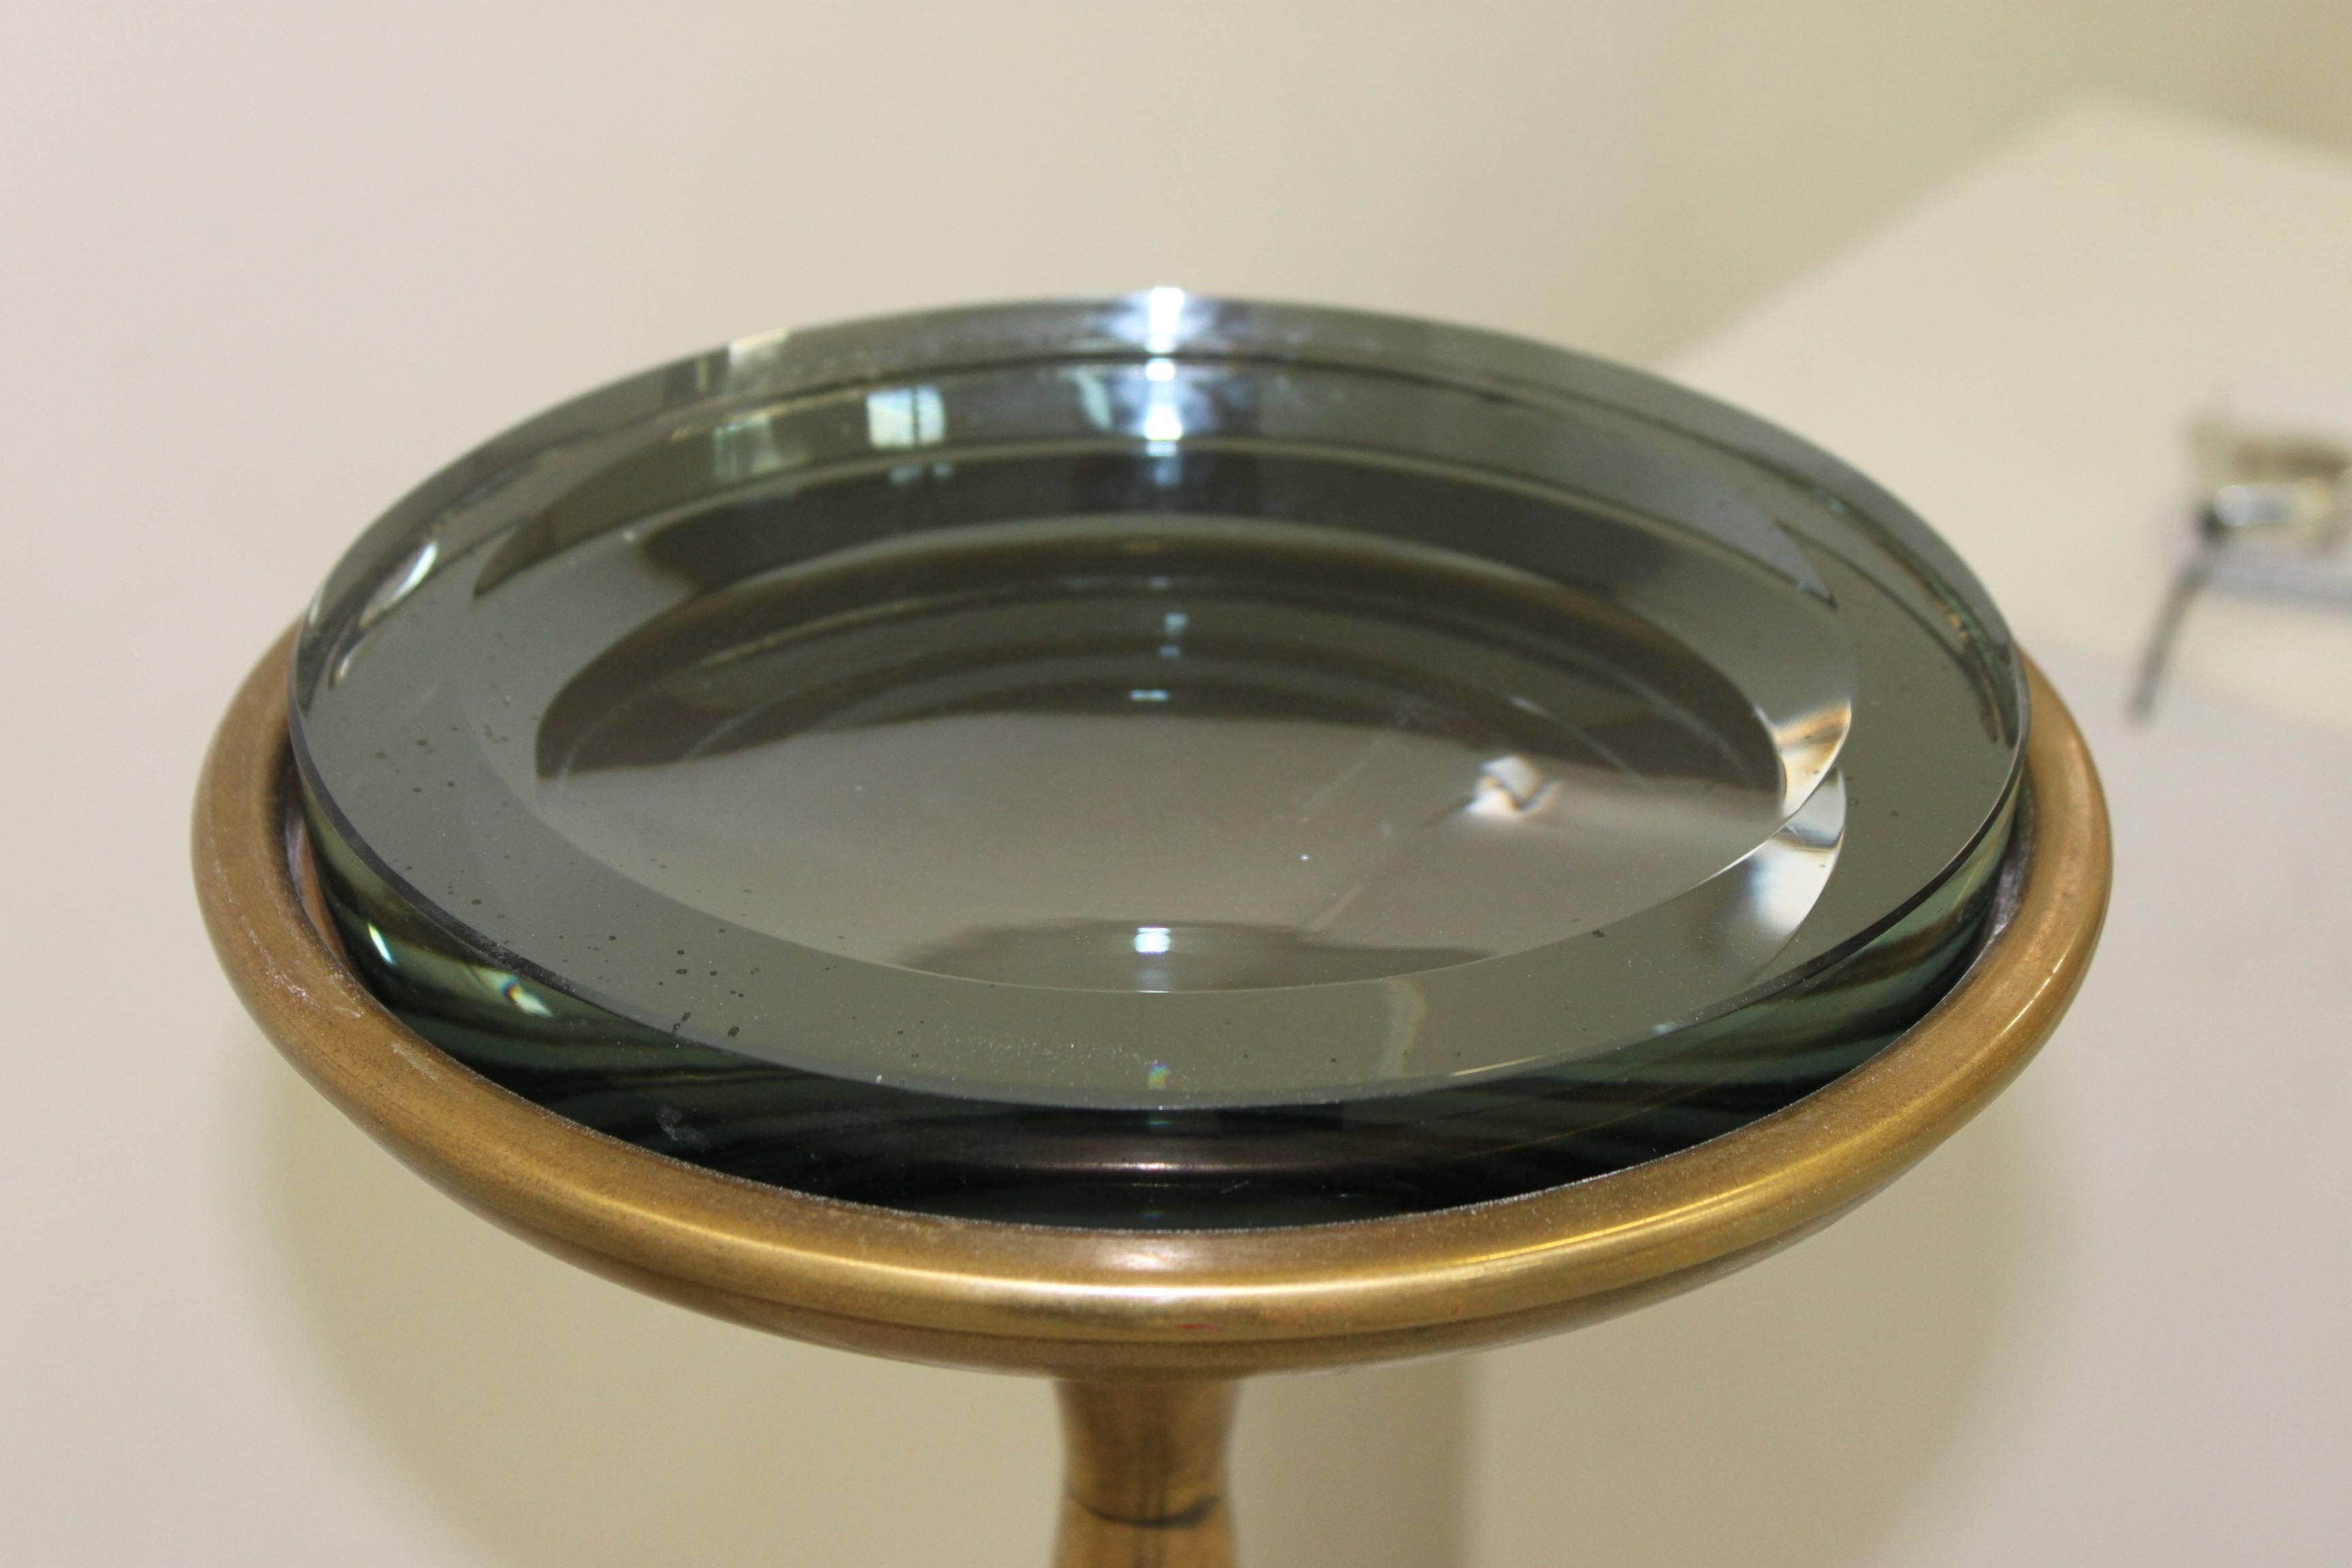 Beautiful standing Ashtray, mod. no. 1776A.
Brass structure and mirrored glass. 
Manufactured by Fontana Arte.
     